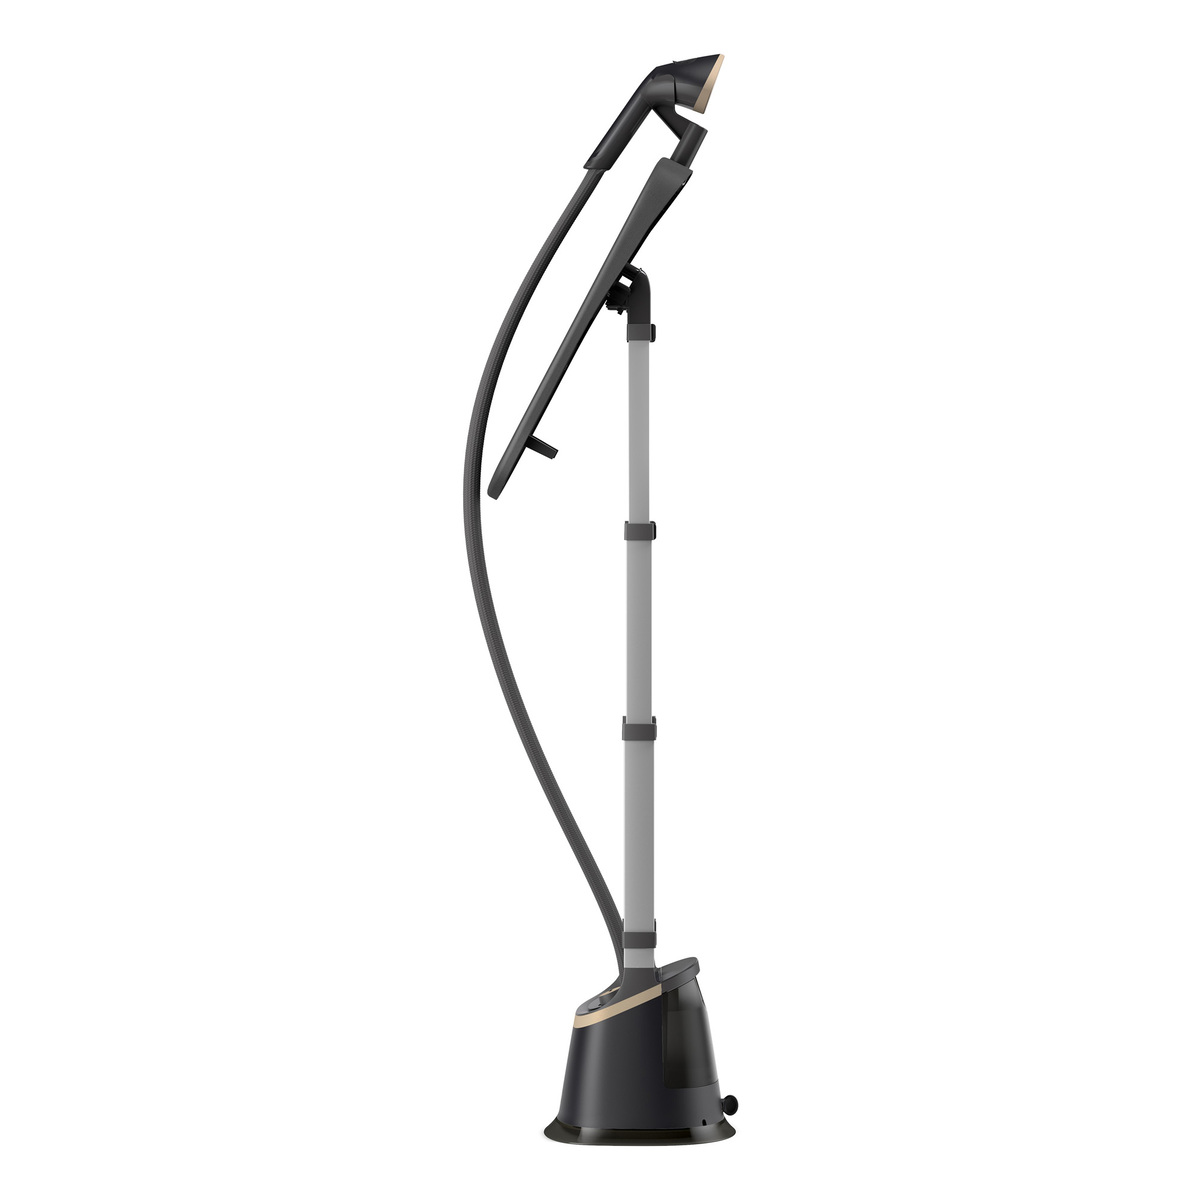 Philips 3000 Series Garment Stand Steamer with Tilting StyleBoard, 2000 W, STE3170/80